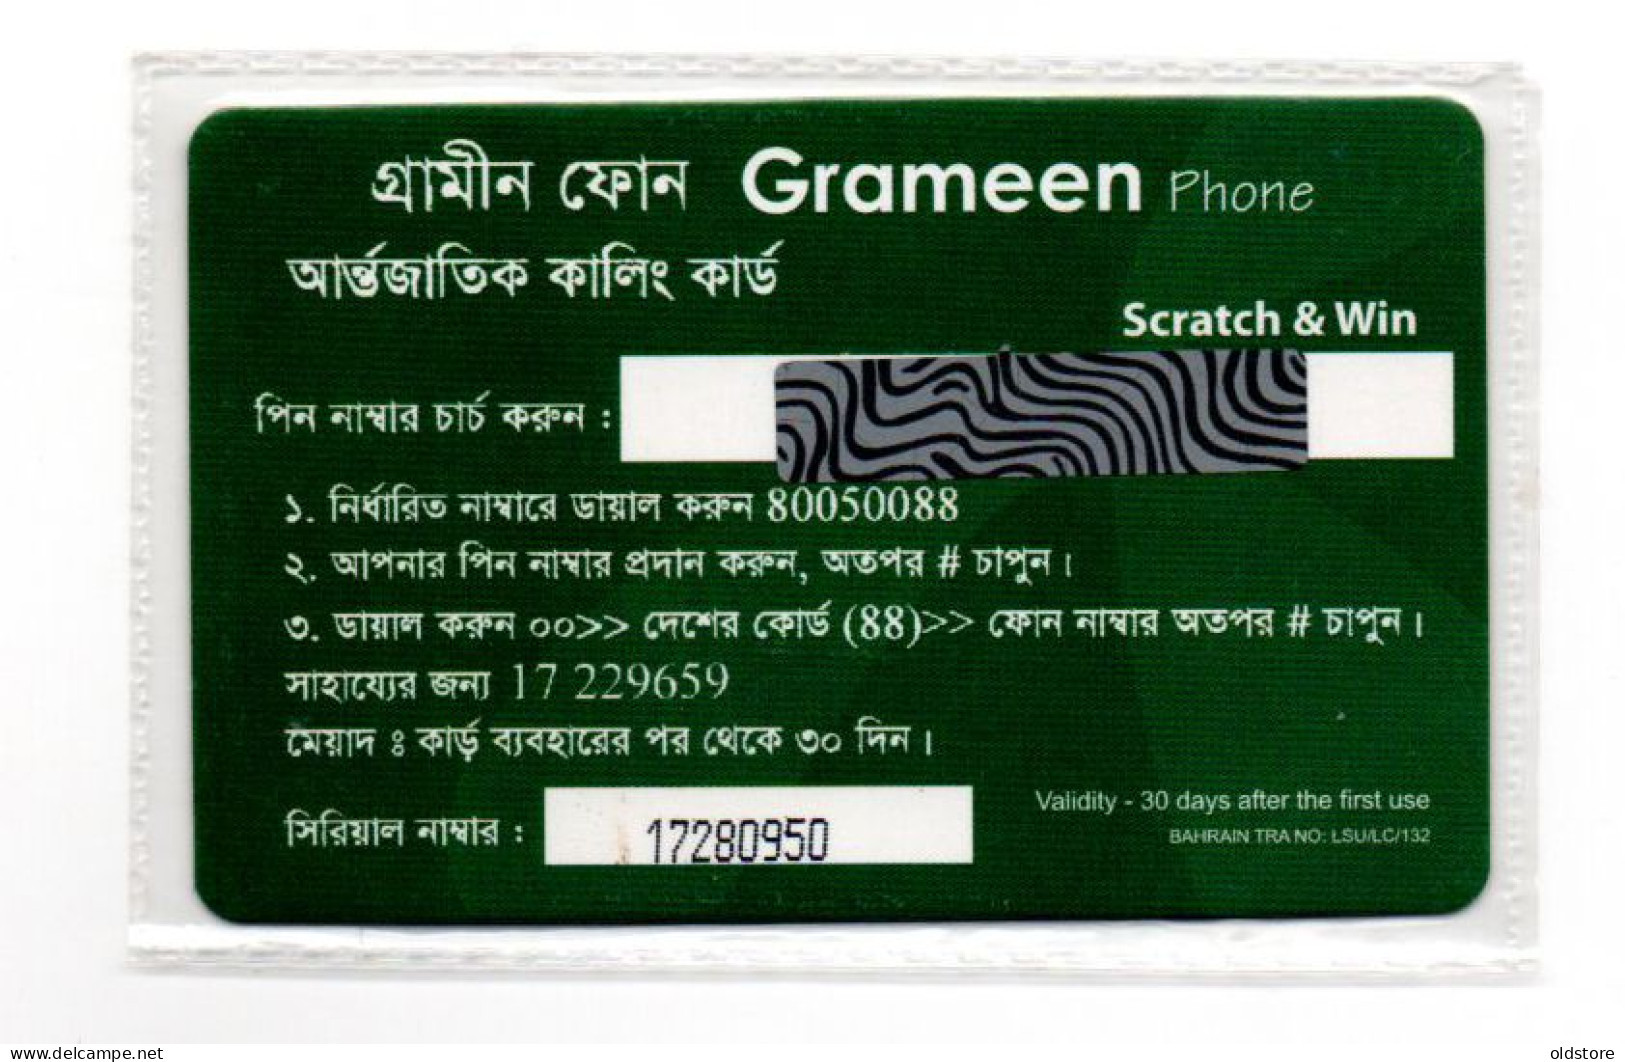 Bahrain Phonecards - For Grameen Phone Indian Company It Was In Bahrain - Colling Card - Mint Card 1 Dinar Voucher - Bahrein